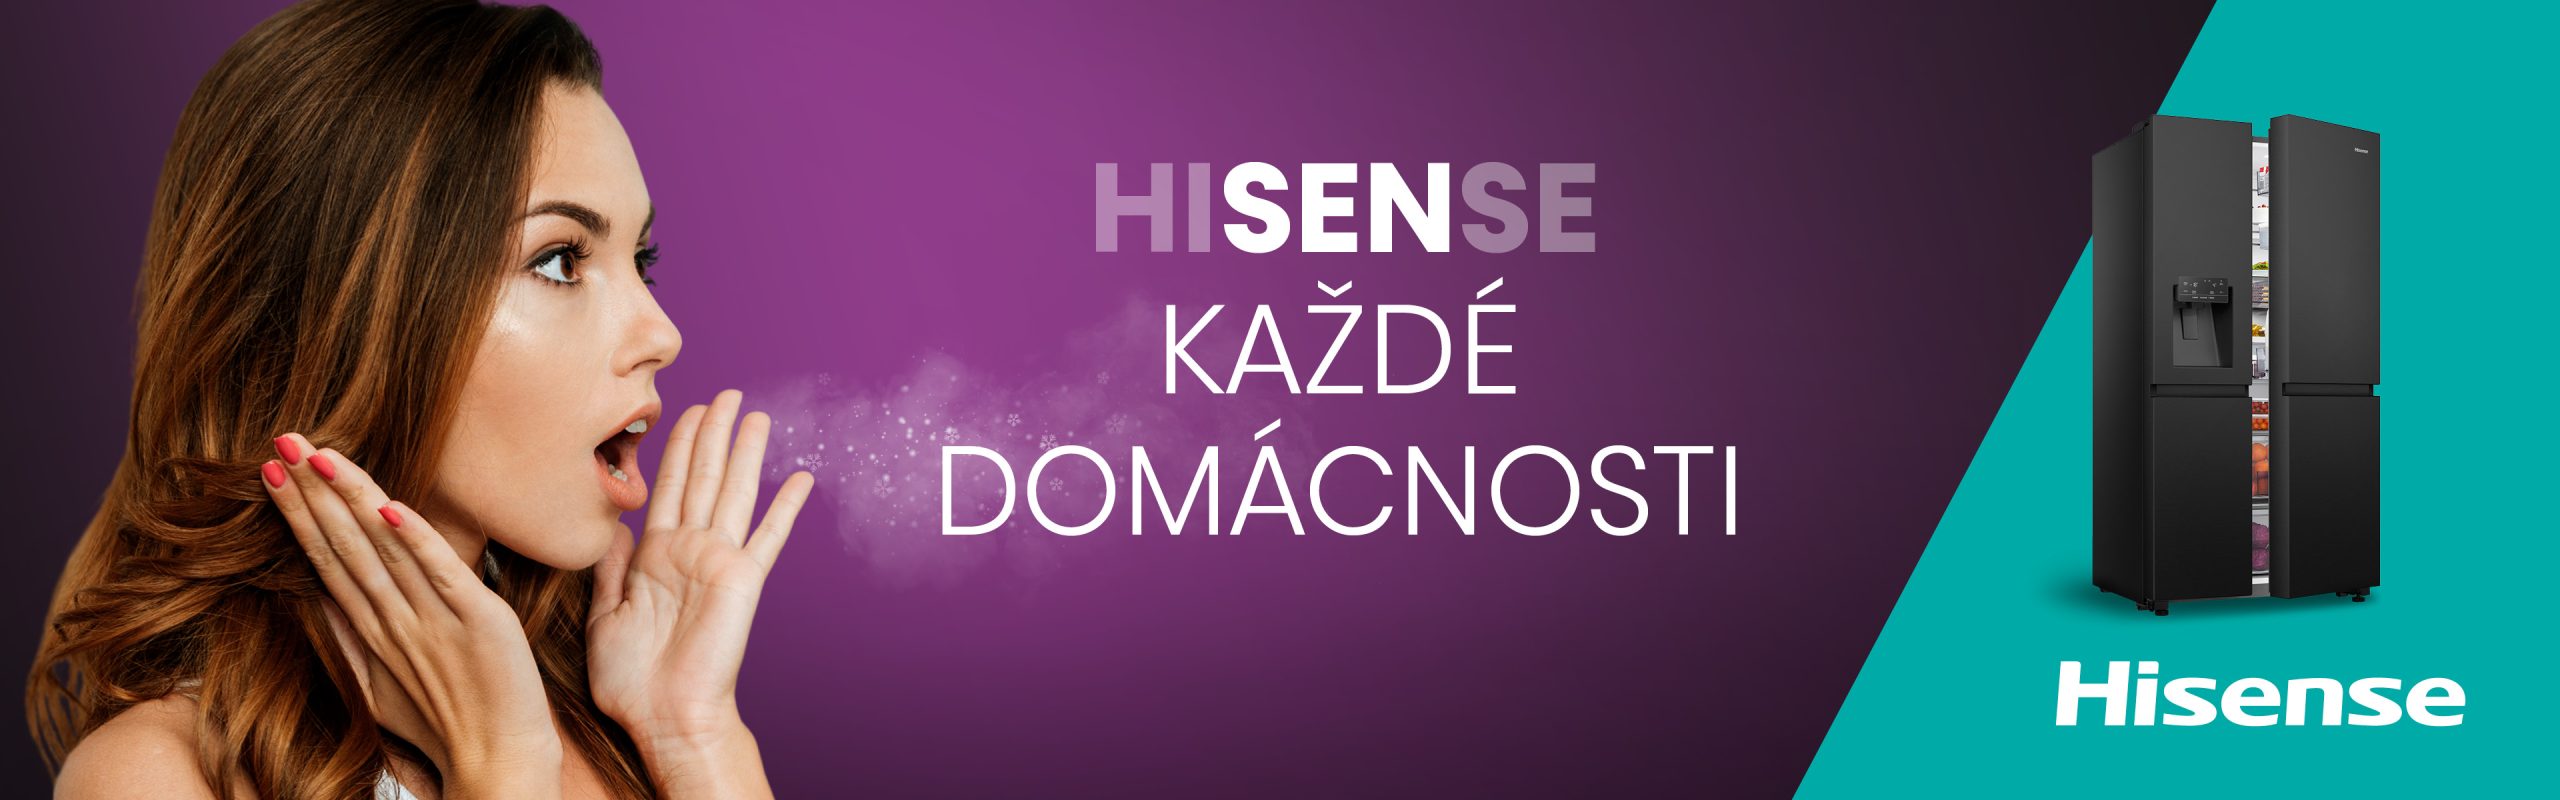 HSN-doma╠ucnost-3840x1200-1-scaled.jpeg